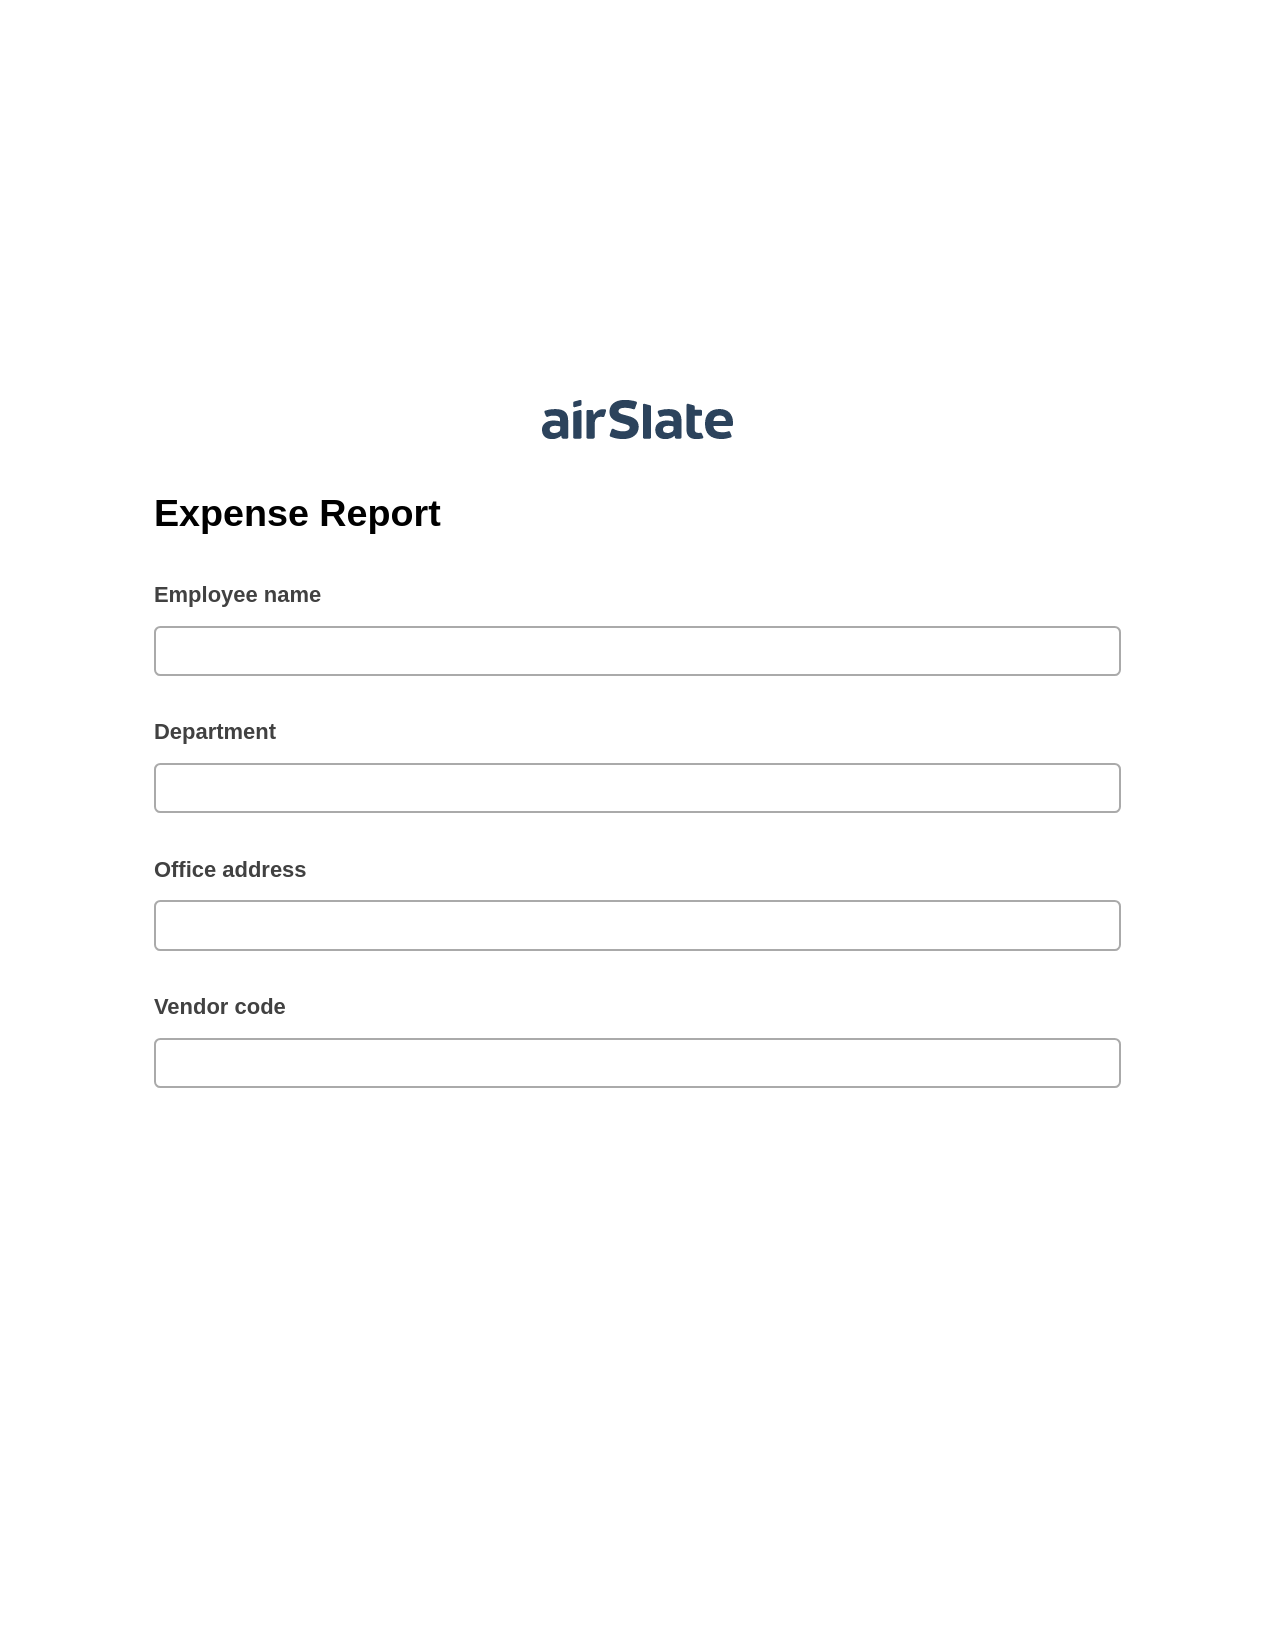 Multirole Expense Report Pre-fill from Salesforce Record Bot, Reminder Bot, Archive to SharePoint Folder Bot